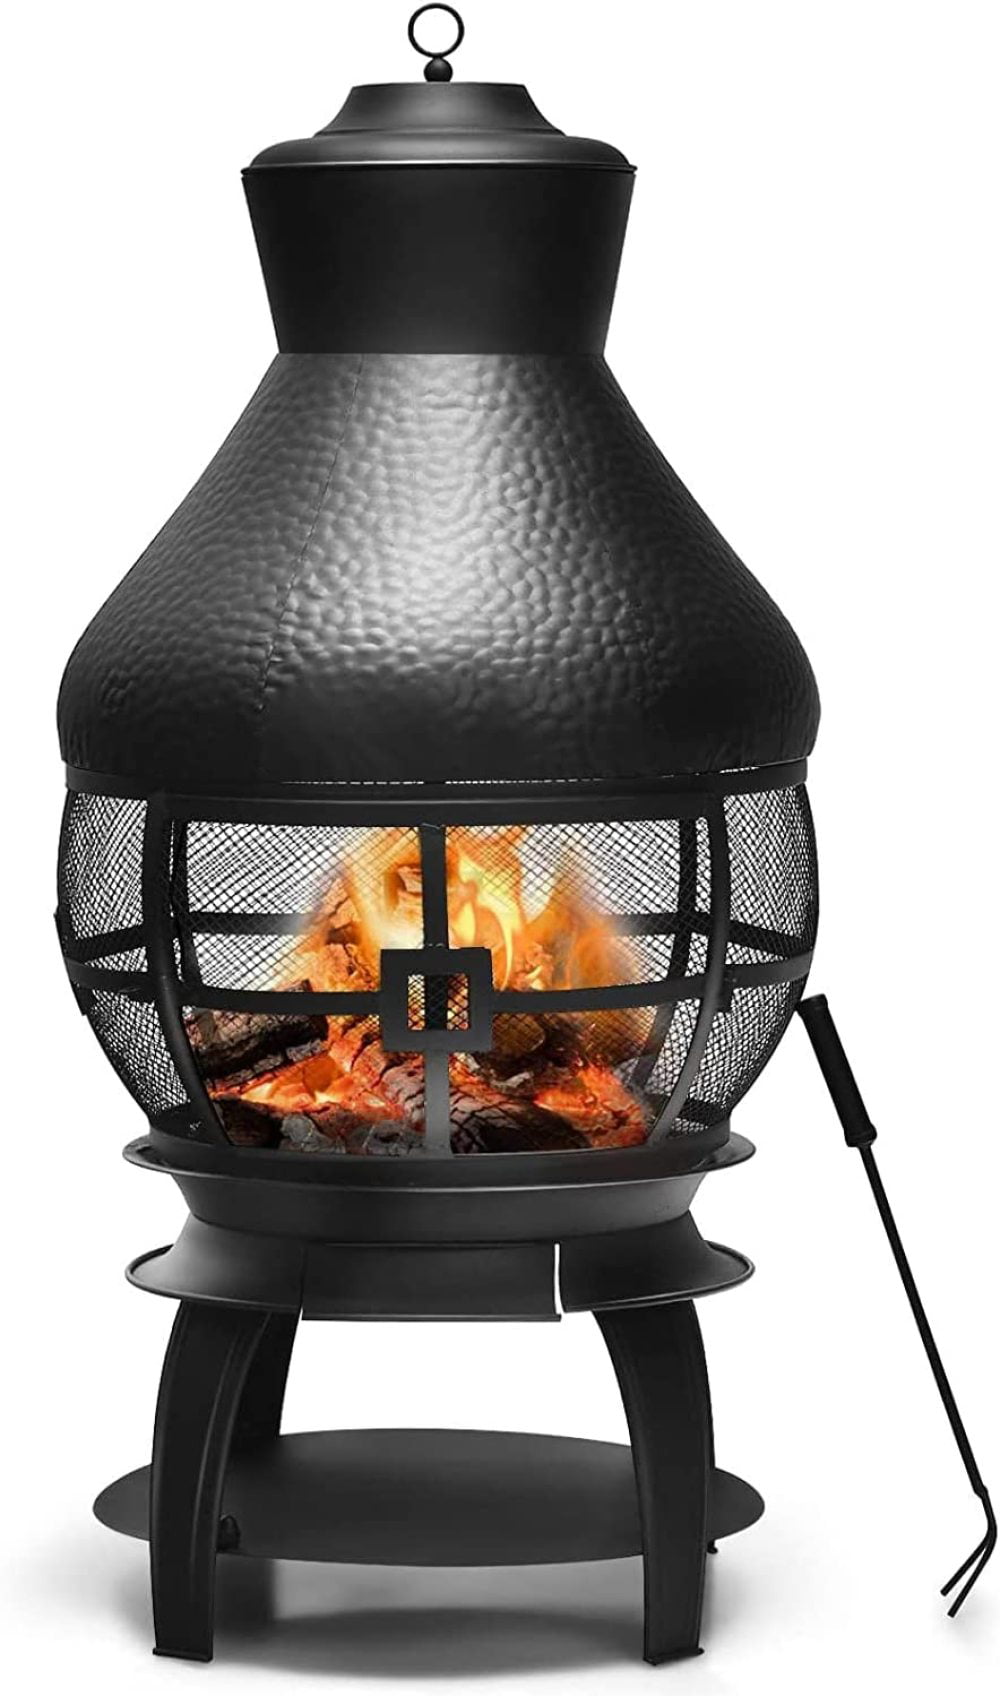 Blooma Chiminea Fire Pit Cover Large Tall Garden Log Burner Chimenea BBQ Stove Oven 